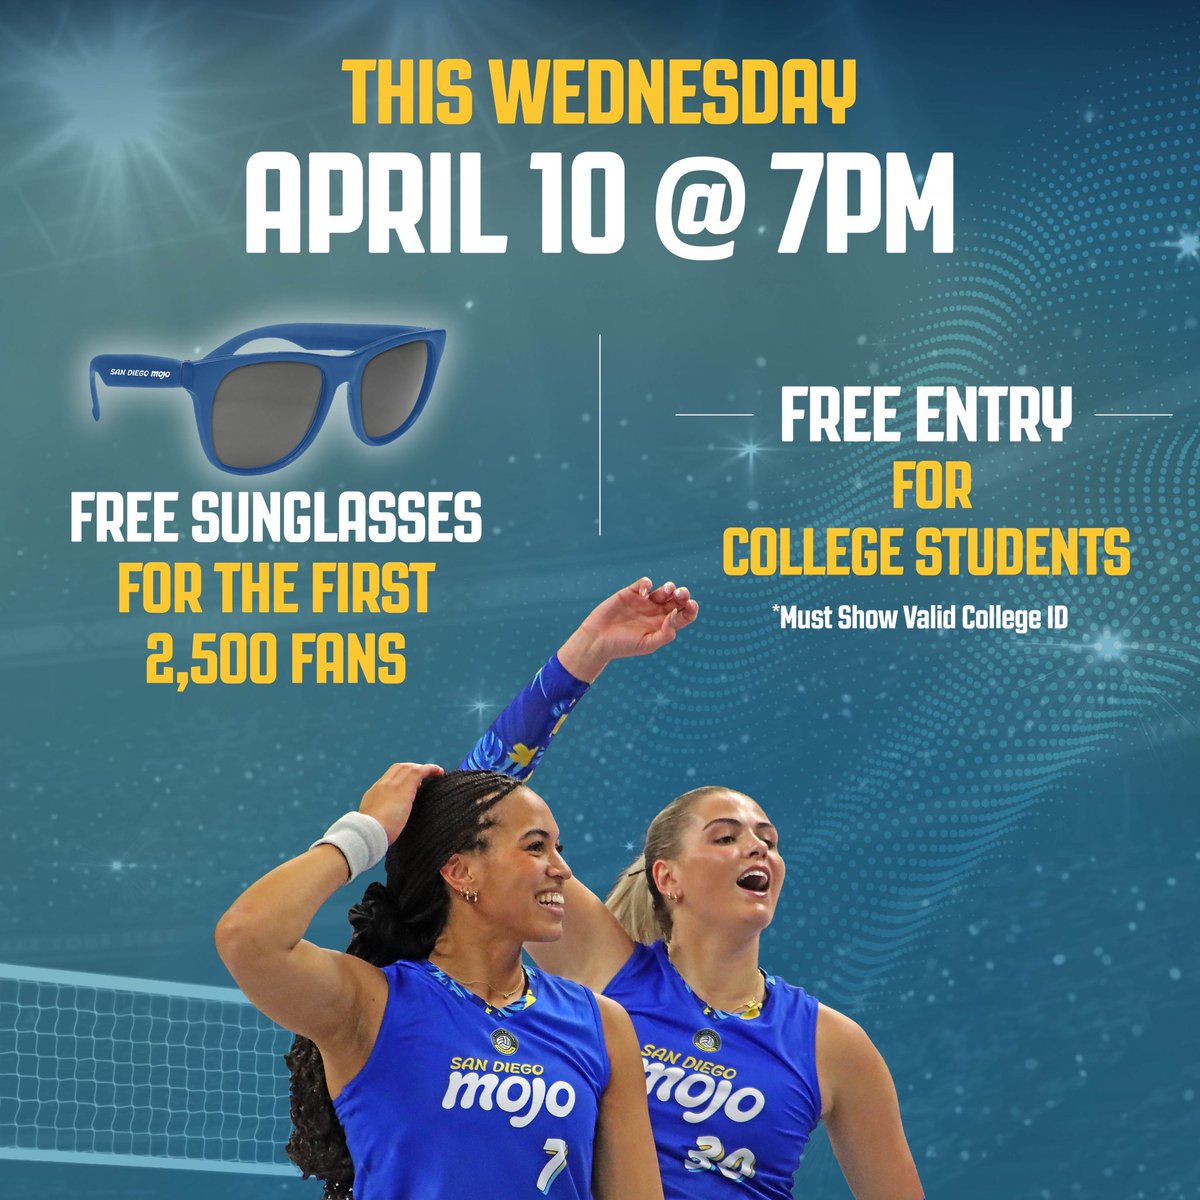 Join us at the April 10th home game at 7PM for College Night at @viejasarena! Bring your friends and a valid college ID for free entry. 😉 PLUS, whether you’re in college or not, you’ve got a chance to claim a special gift! See you at Viejas! SanDiegoMojoVb.com